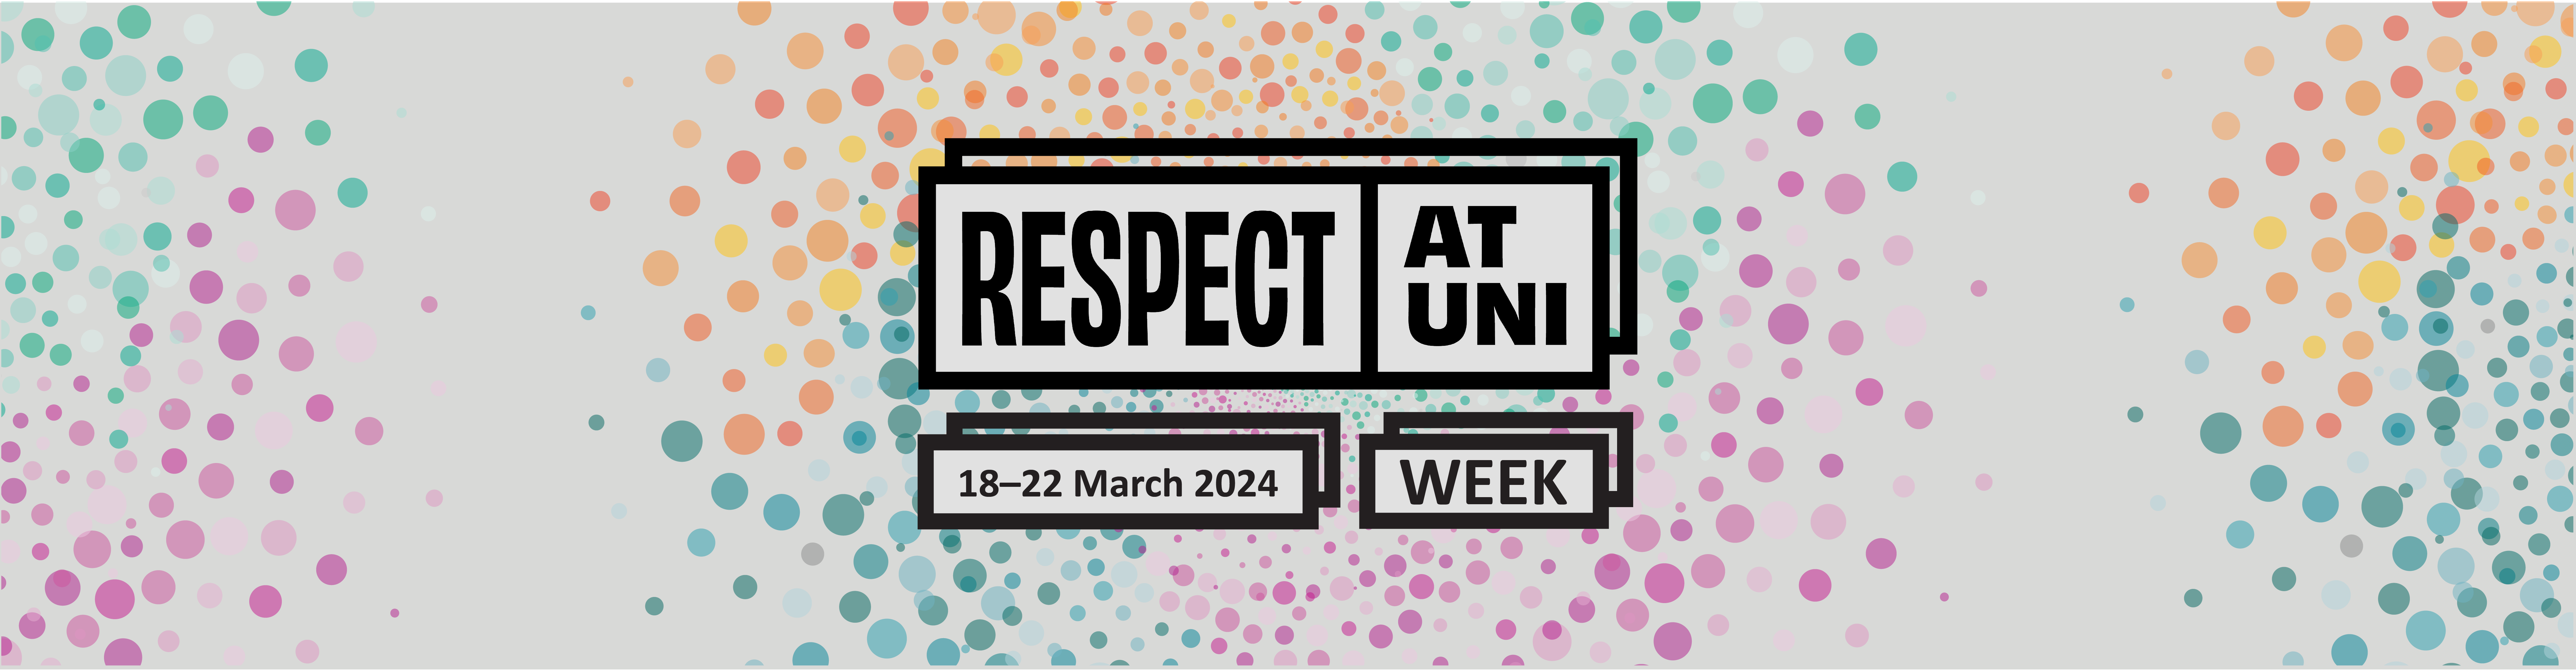 Respect at Uni Week 18 to 22 March 2024